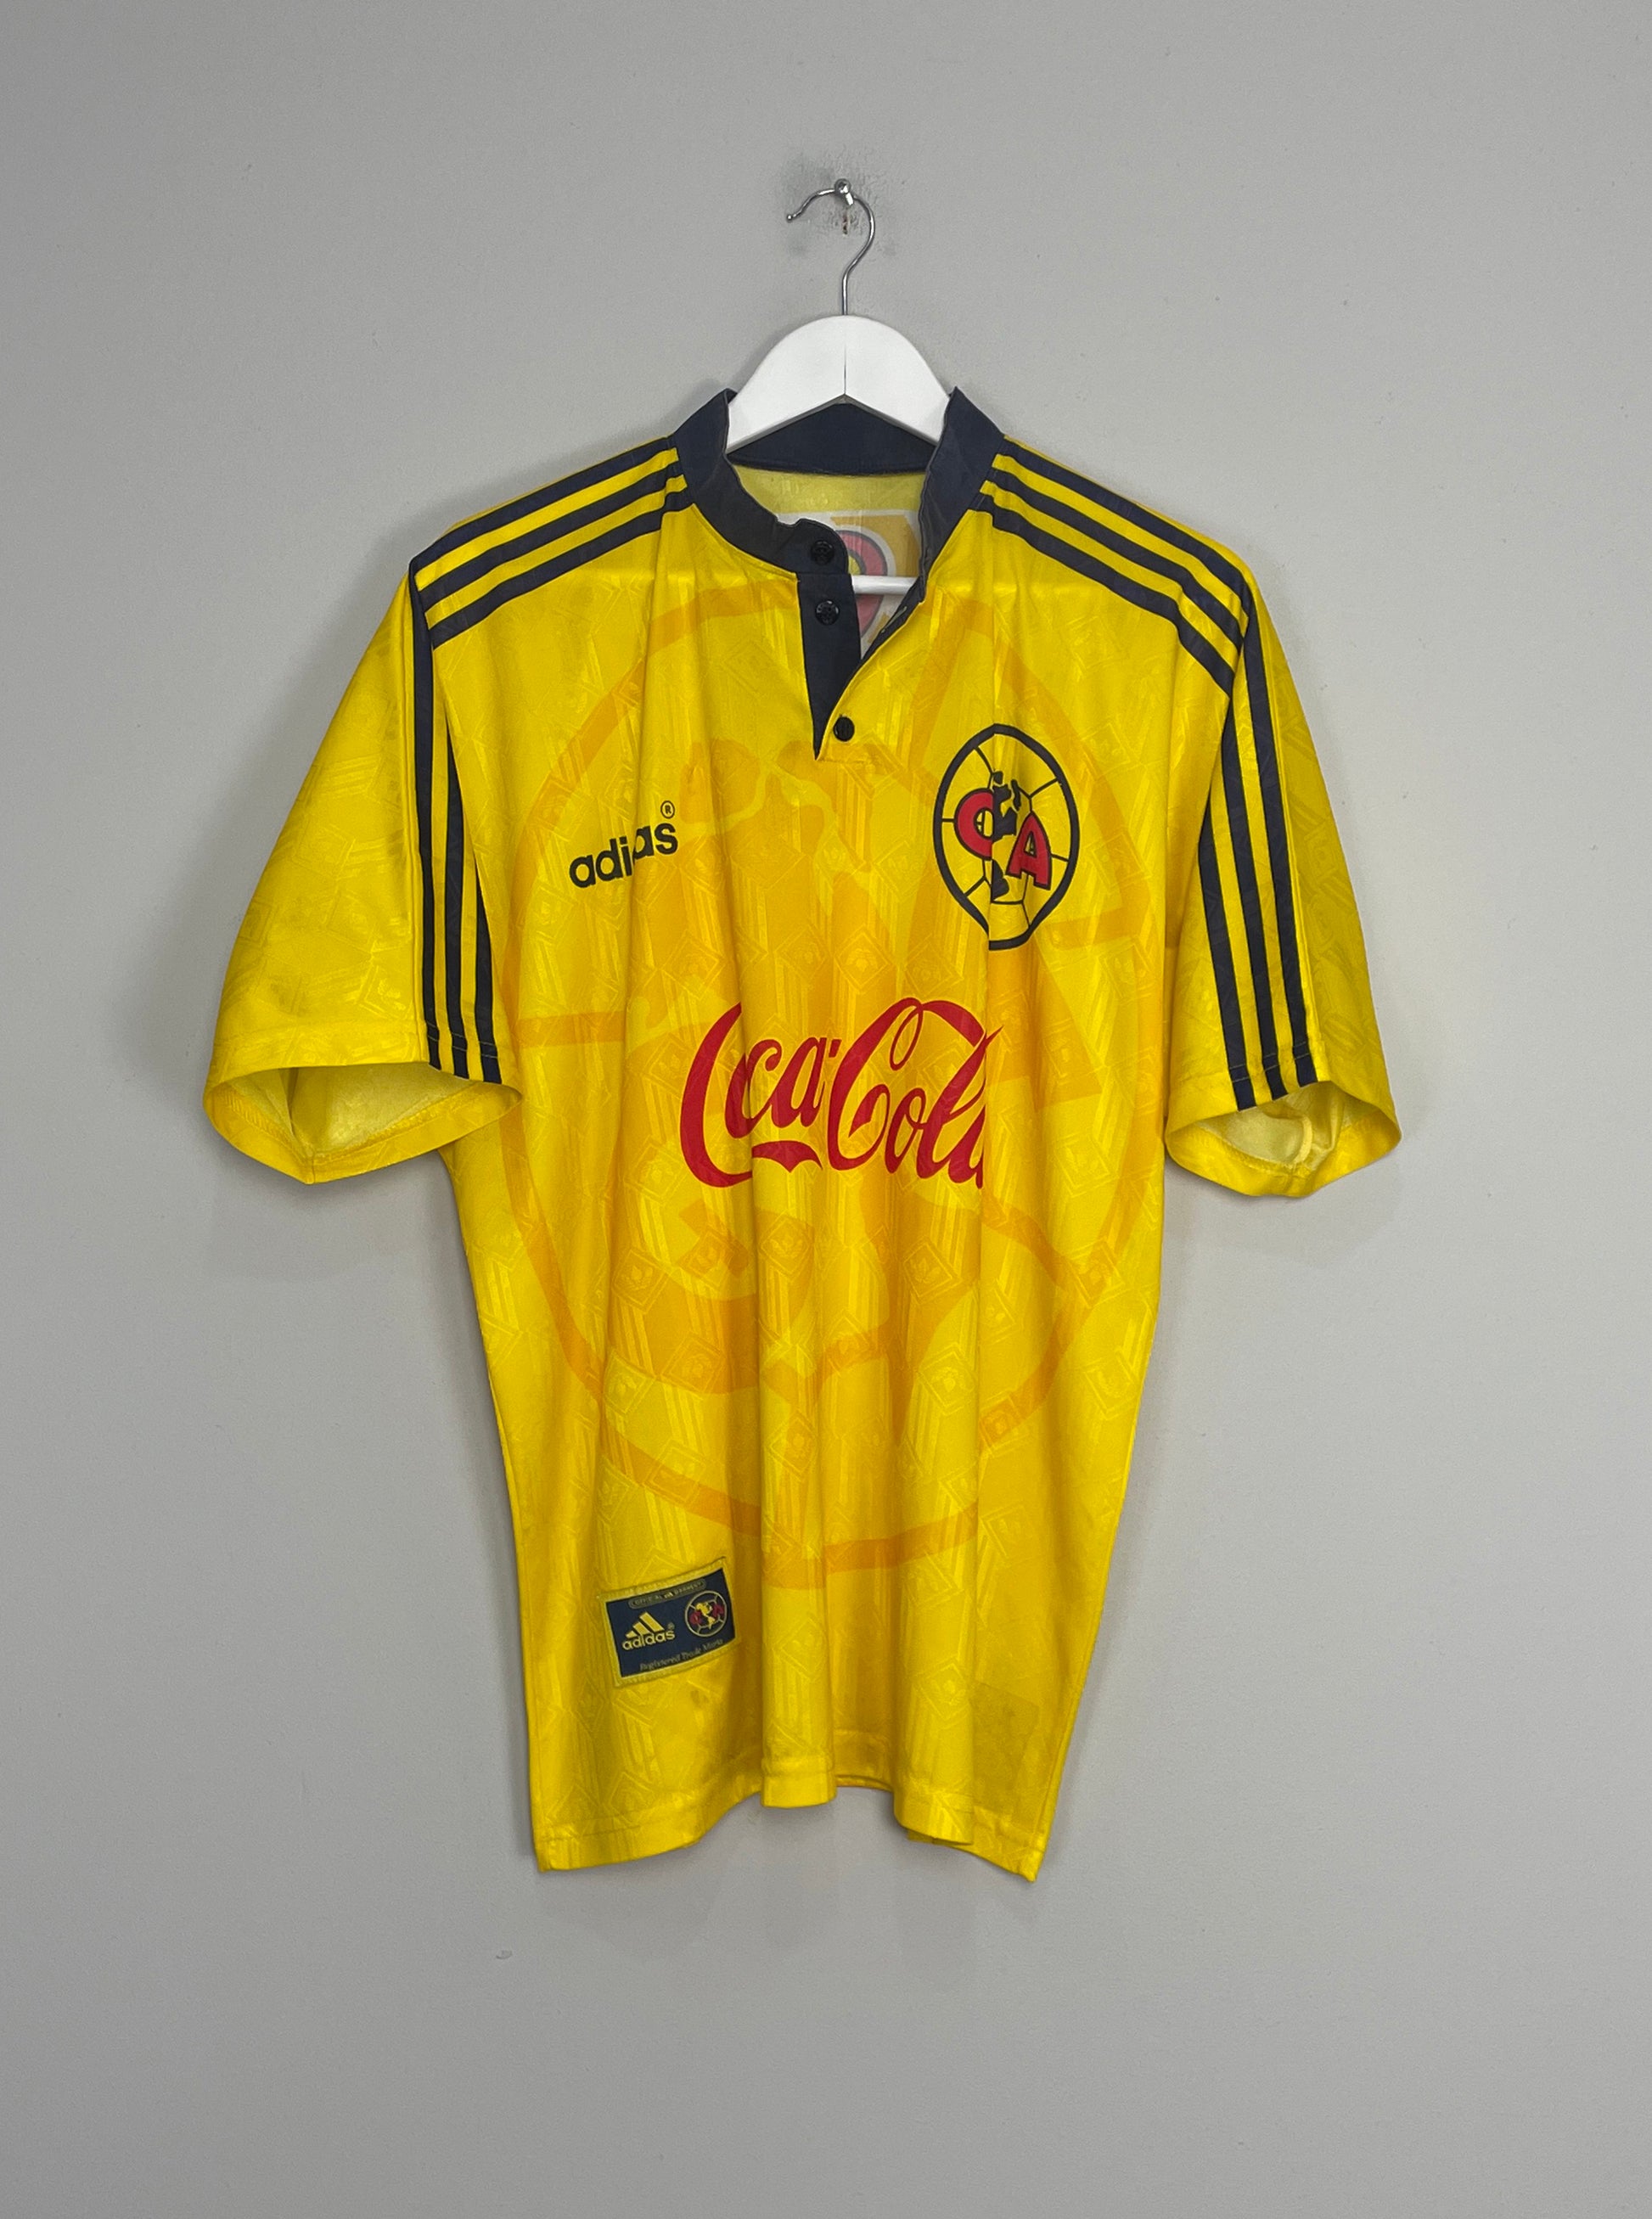 Image of the Club America shirt from the 1996/97 season